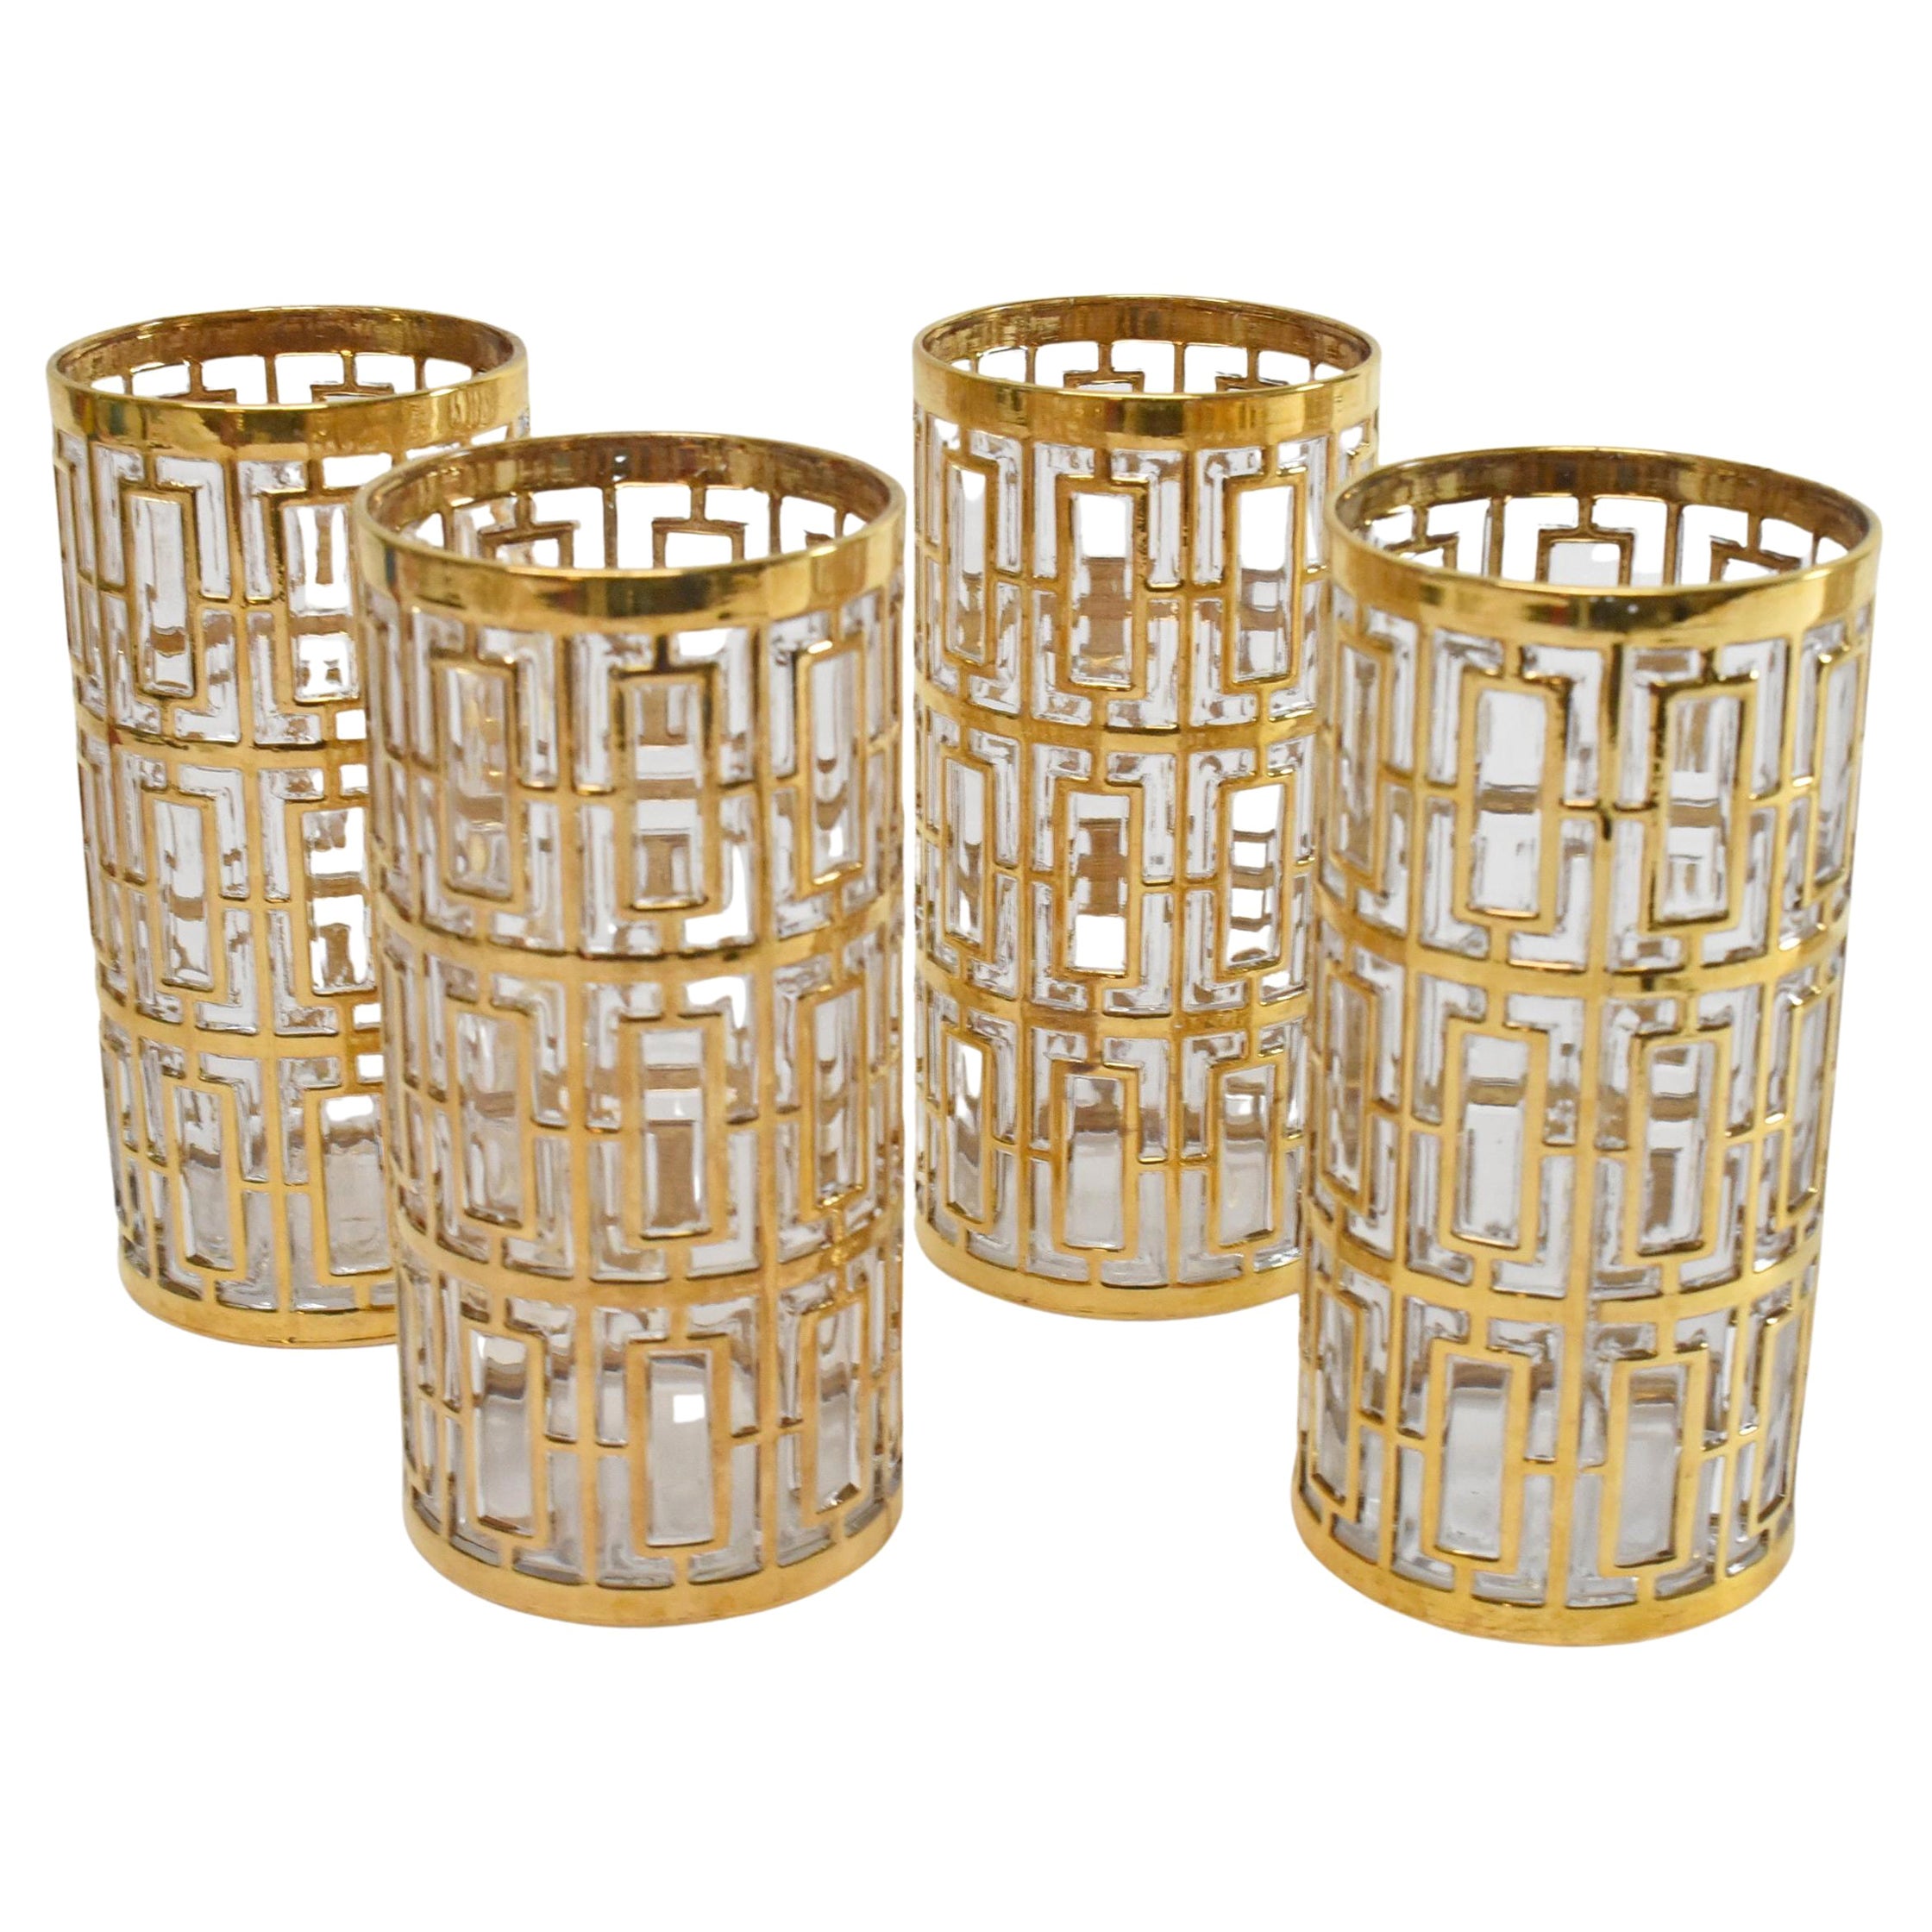 4 Imperial Glass Highball Glasses with 22K Gold Overlay Shoji Pattern